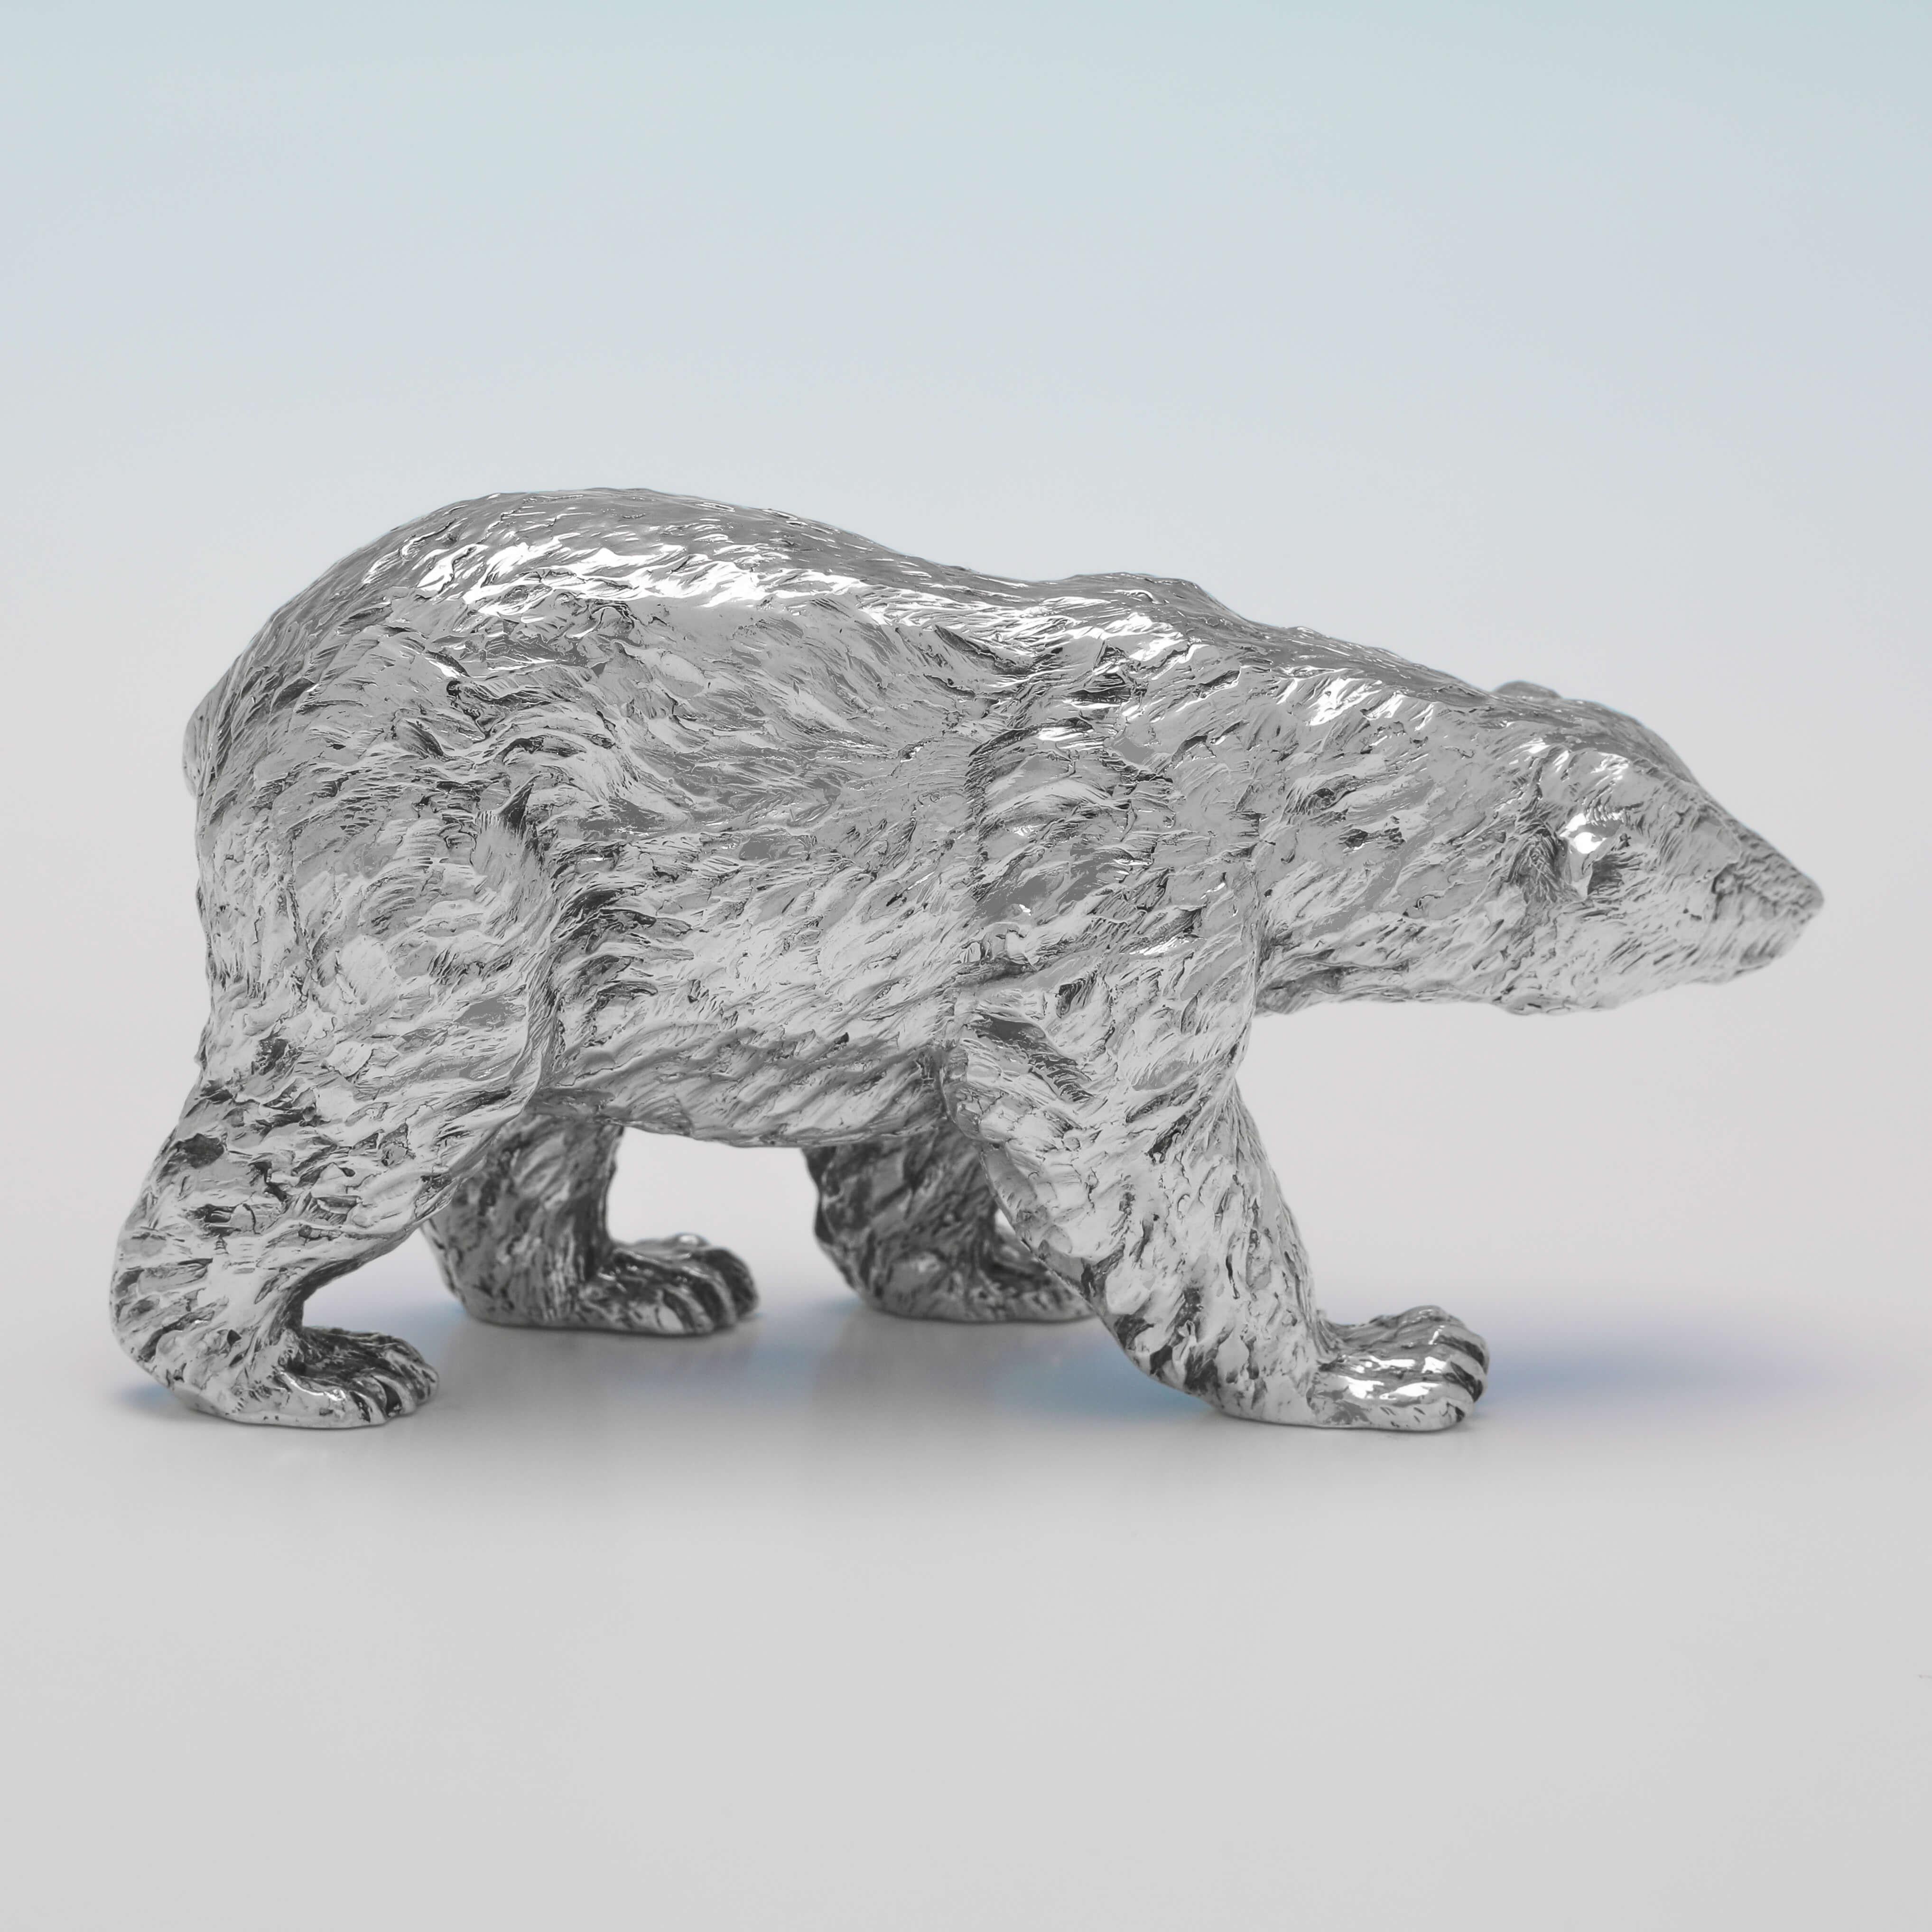 Hallmarked in London in 2013 by BSE Products, this Sterling Silver Model of a Polar Bear, is realistically cast. The polar bear measures 2